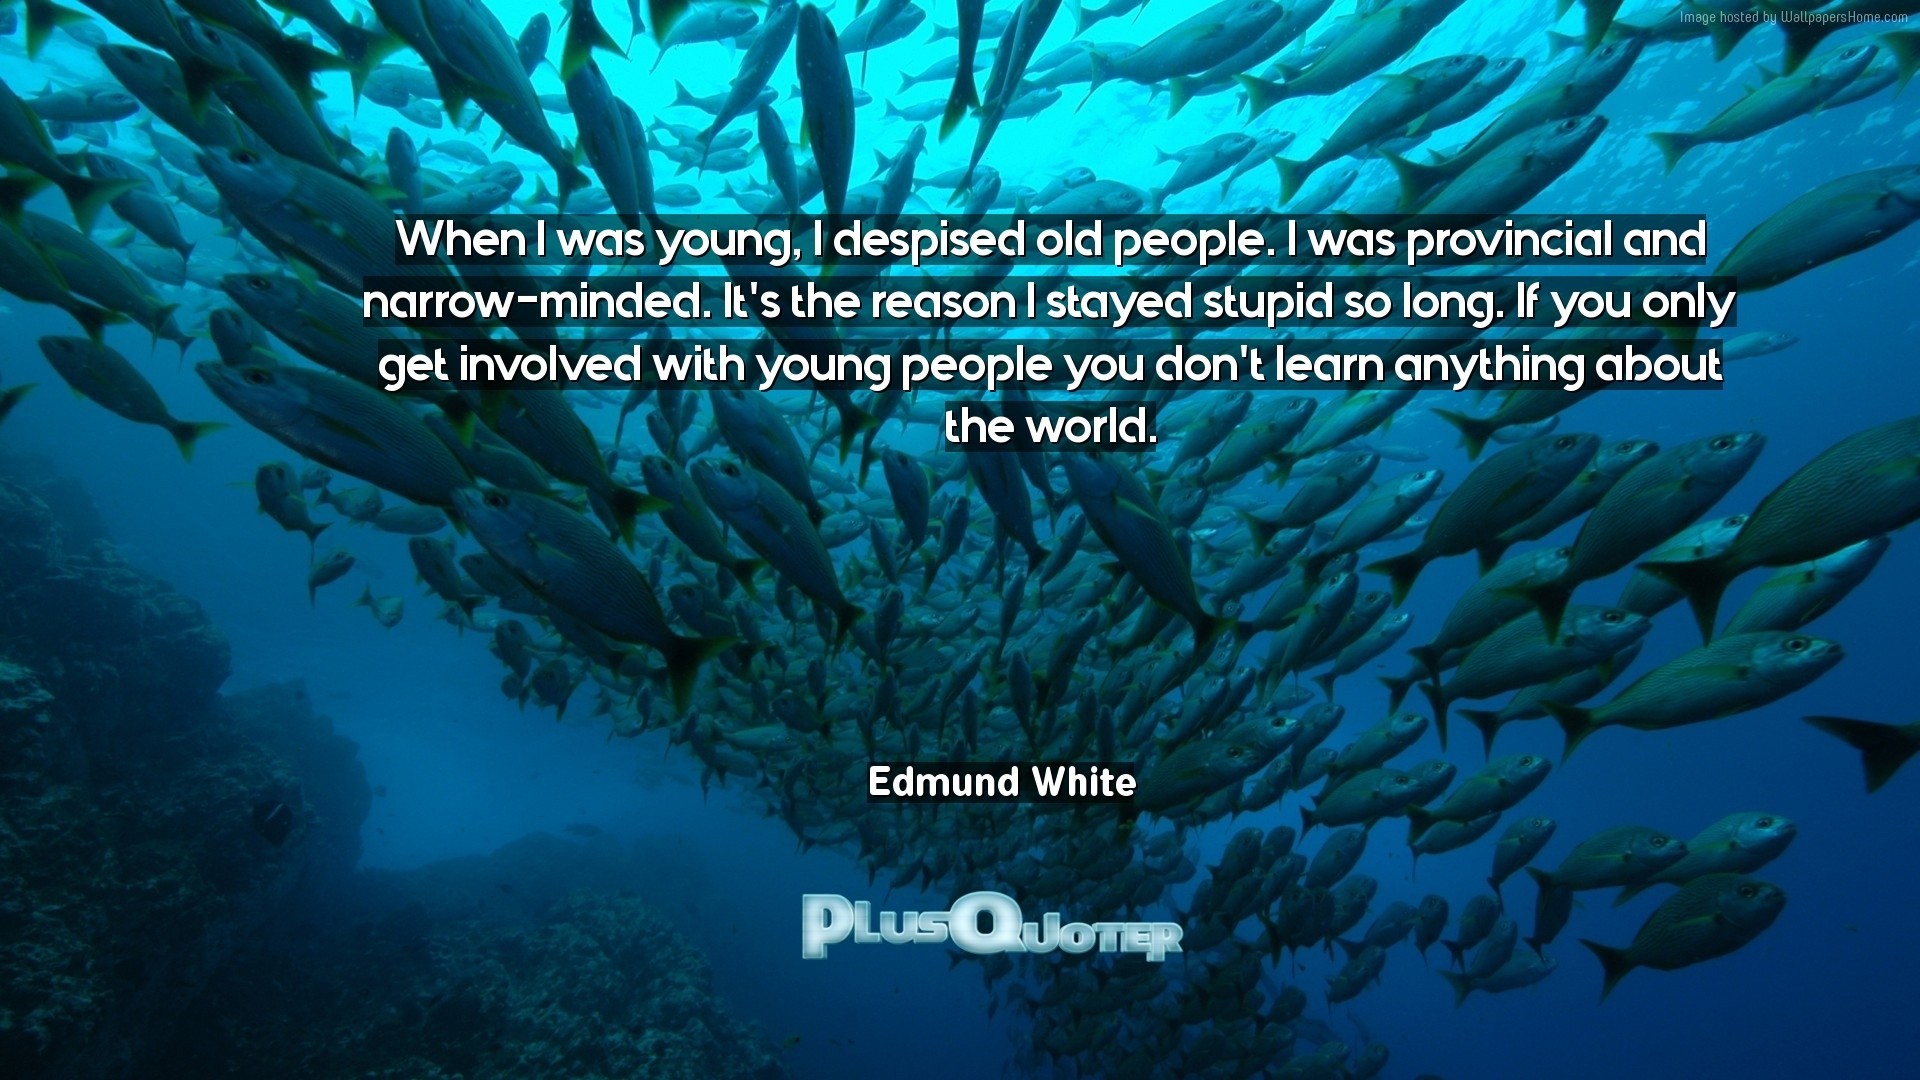 Download Wallpaper With Inspirational Quotes When I - Marine Protection - HD Wallpaper 